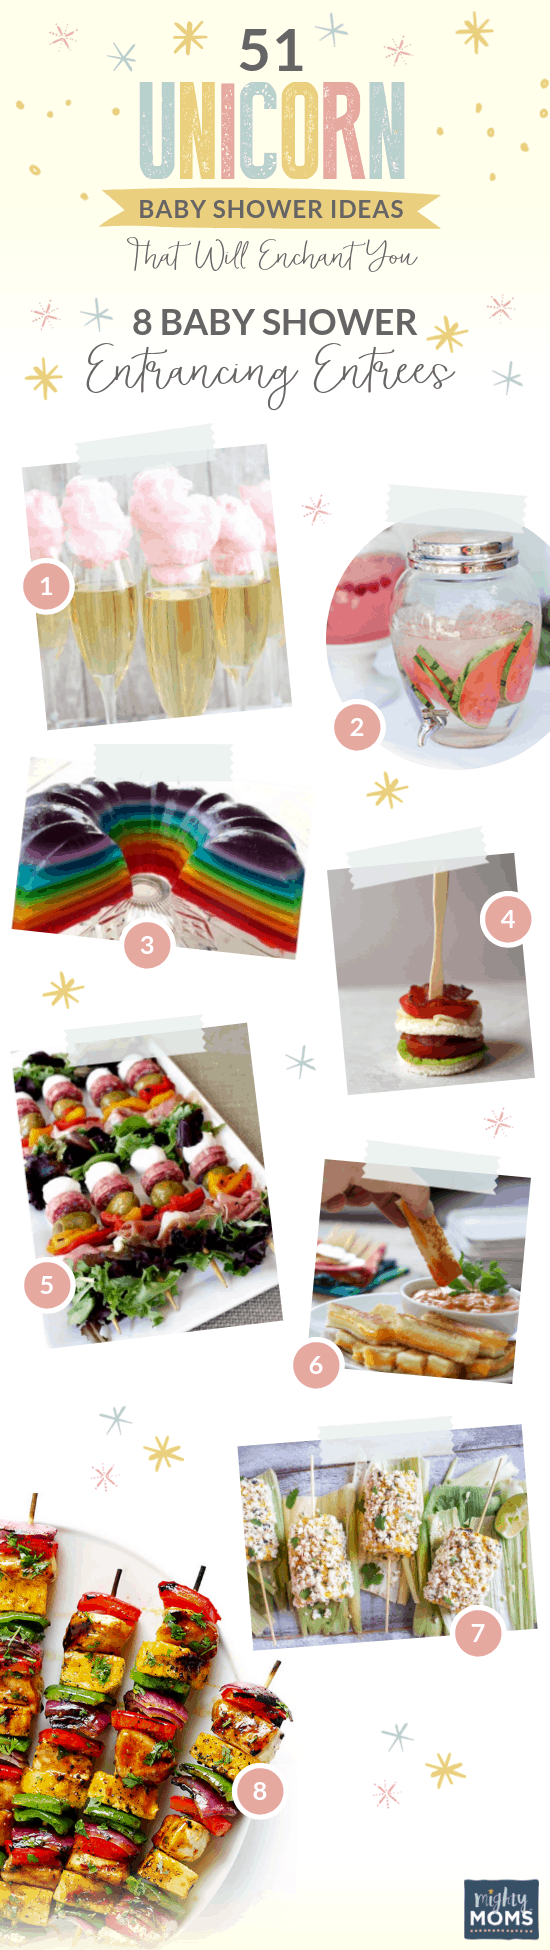 8 Delicious Unicorn Baby Shower Dishes - MightyMoms.club